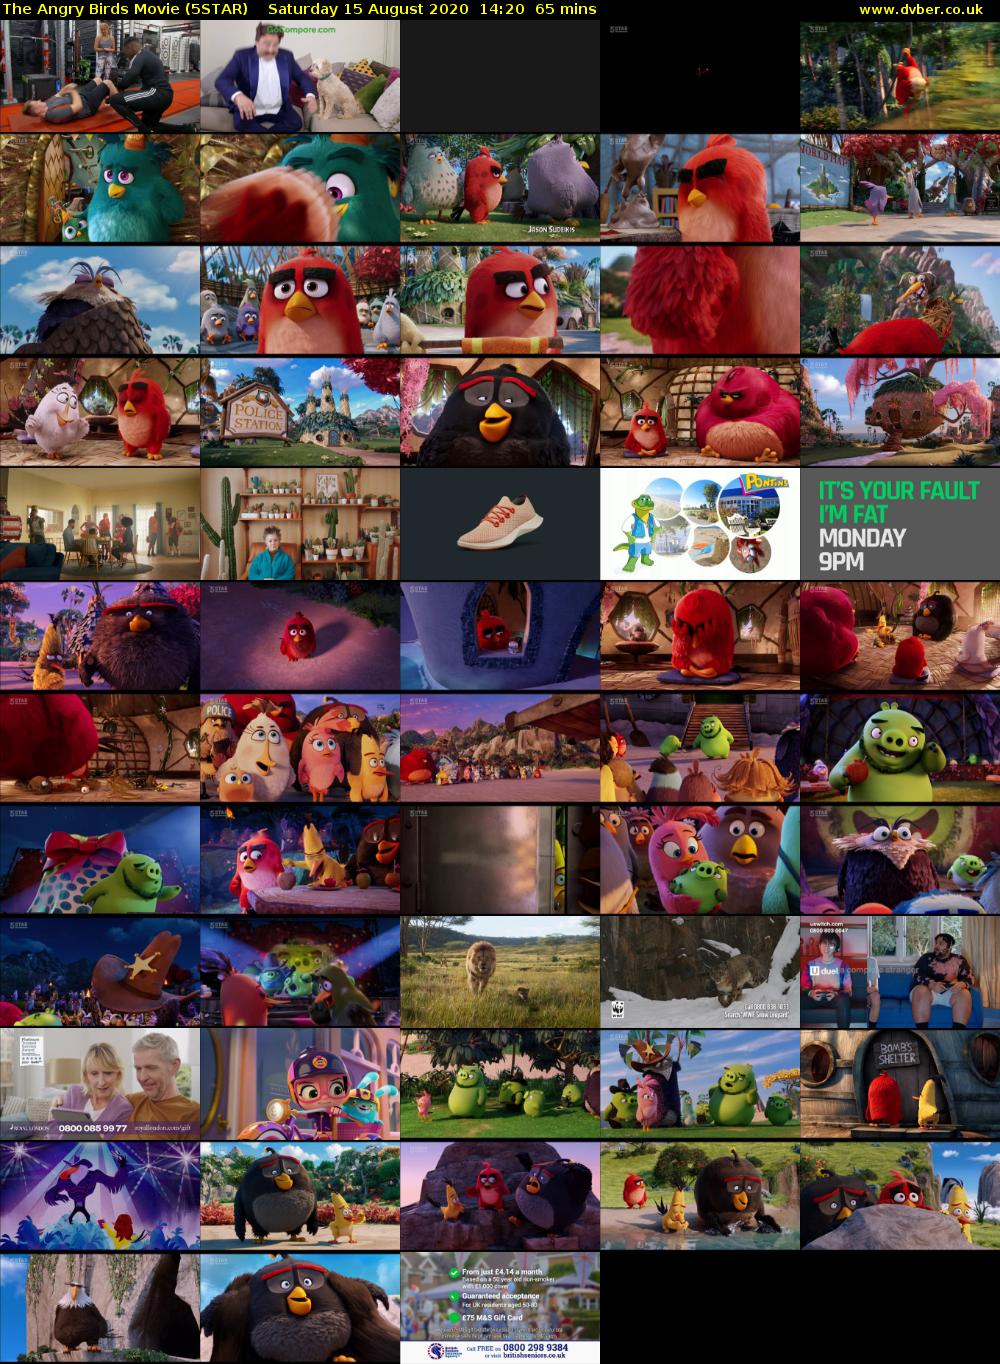 The Angry Birds Movie (5STAR) Saturday 15 August 2020 14:20 - 15:25